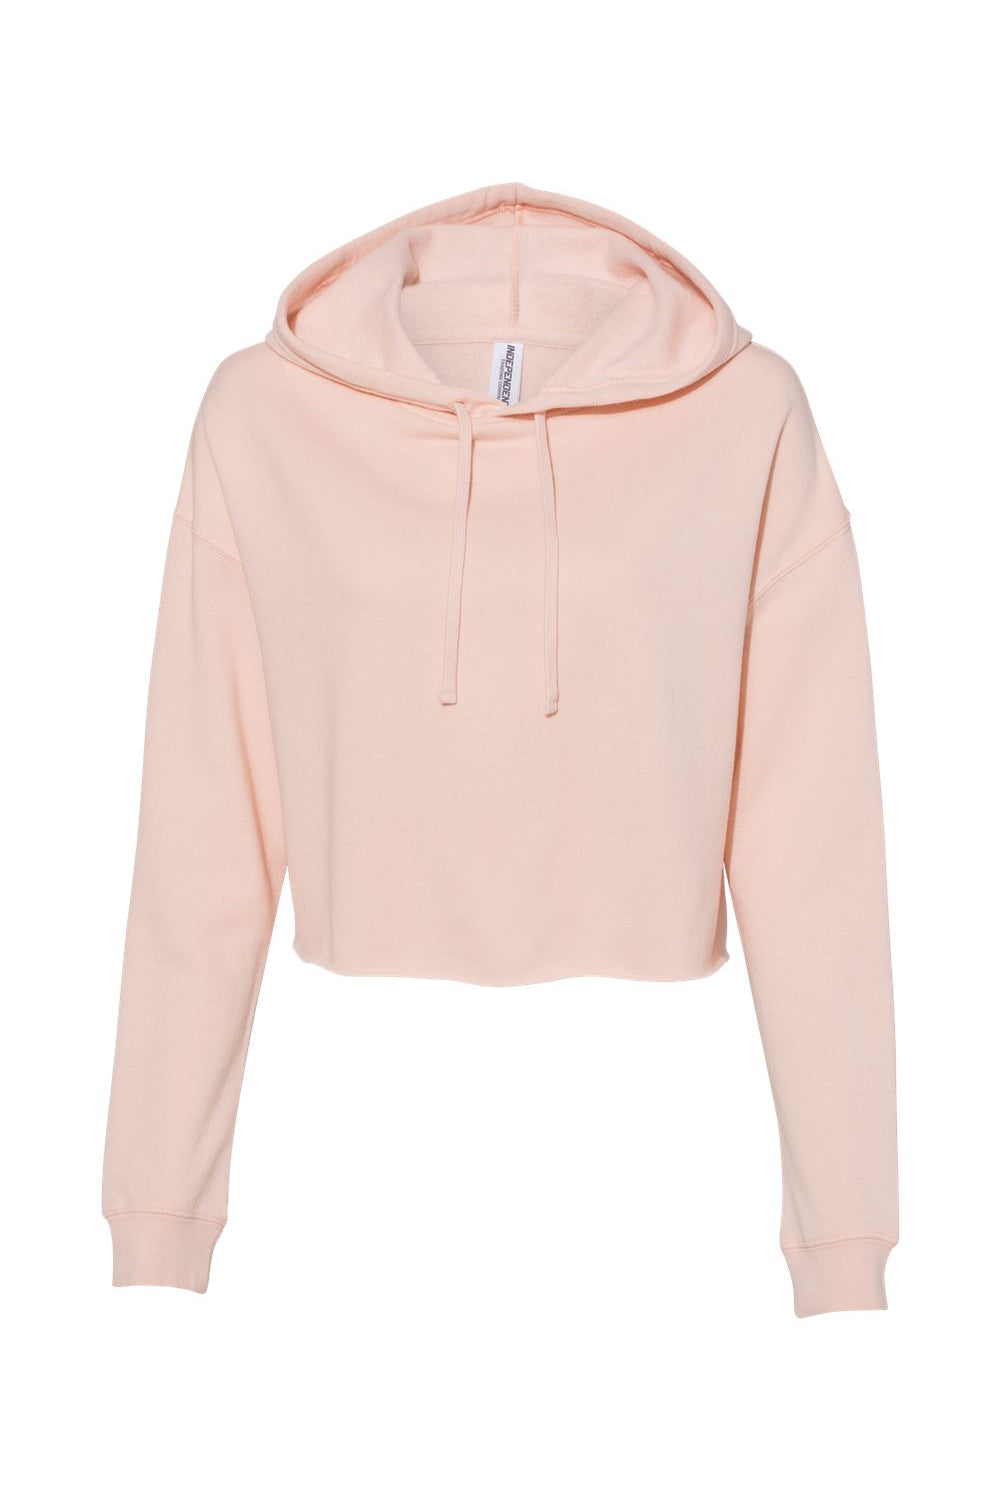 Independent Trading Co. AFX64CRP Womens Crop Hooded Sweatshirt Hoodie Blush Flat Front